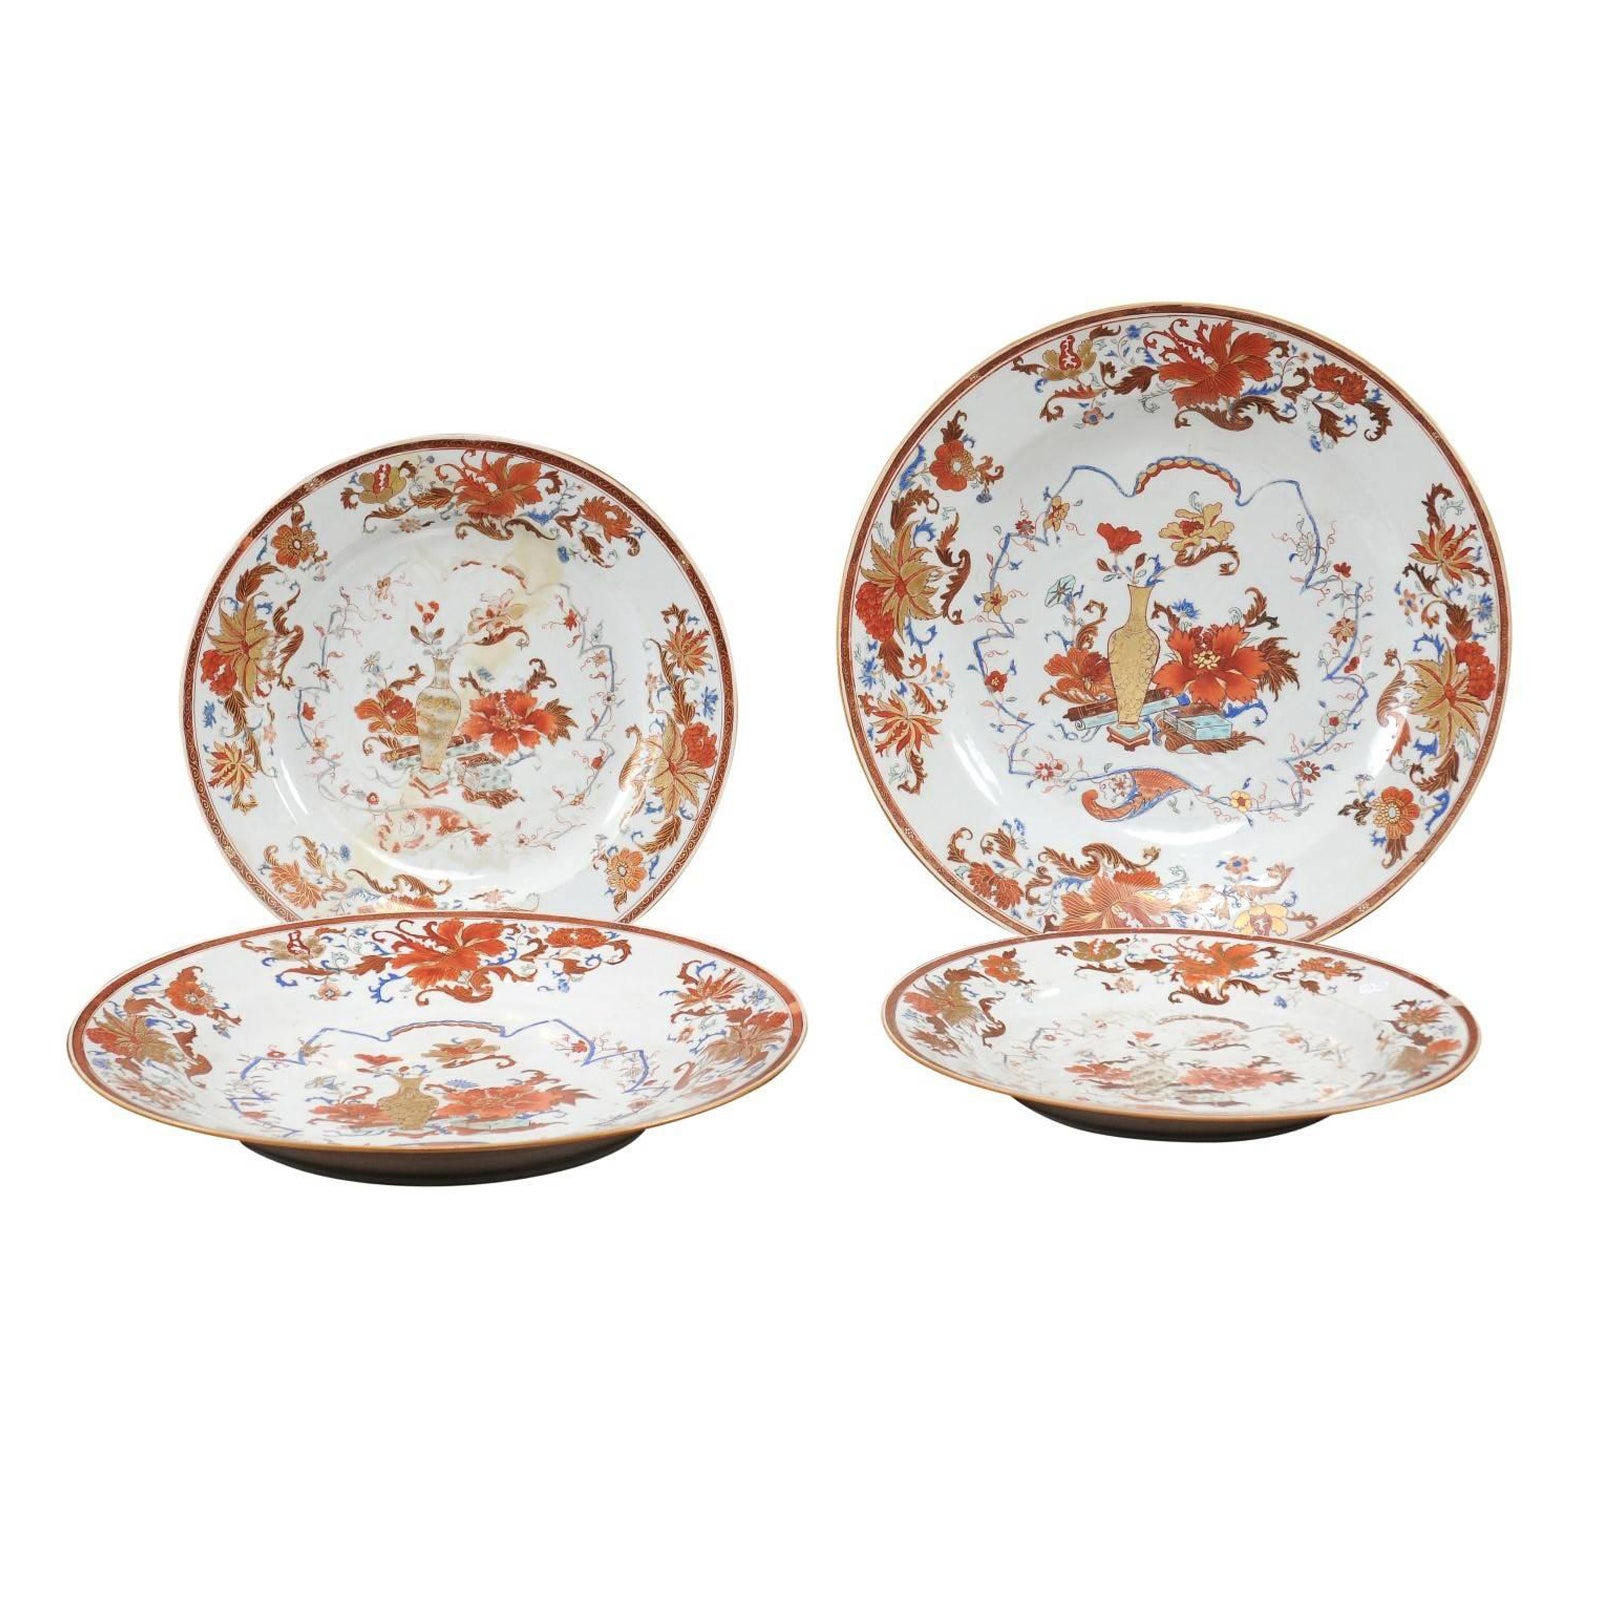 Set of 4 18th Century Chinese Export Imari Porcelain Chargers in 2 Sizes